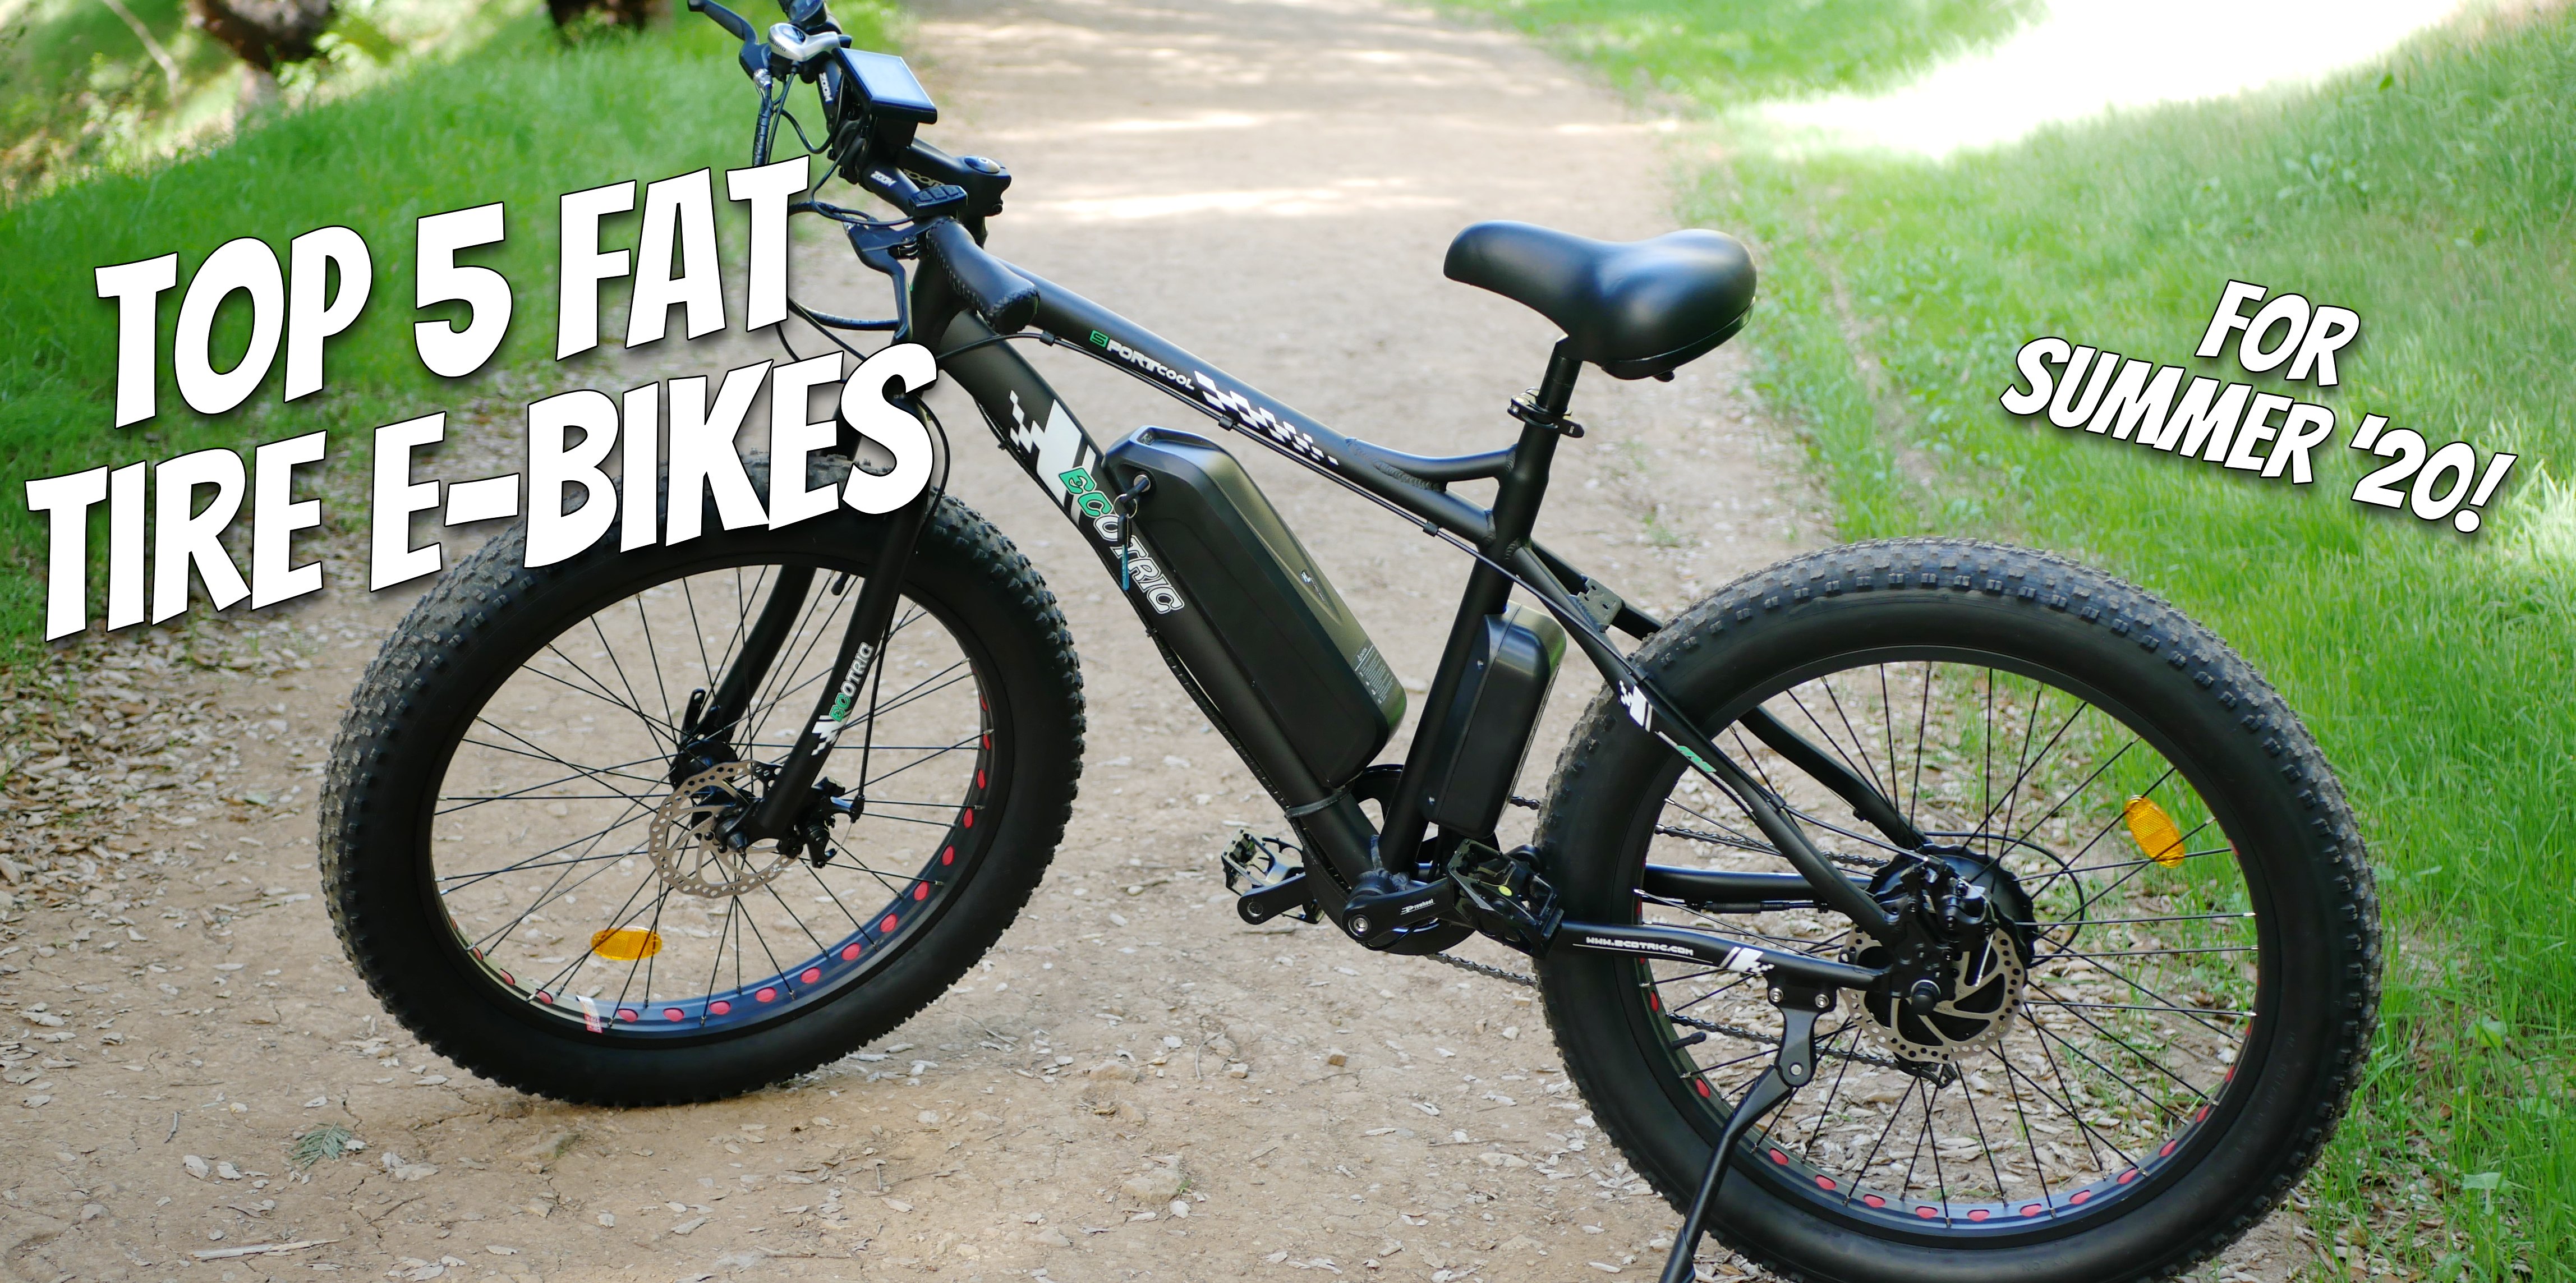 Doodt kanker helpen Top 5 fat tire electric bikes we've tested (and you'll want!) for summer  2020